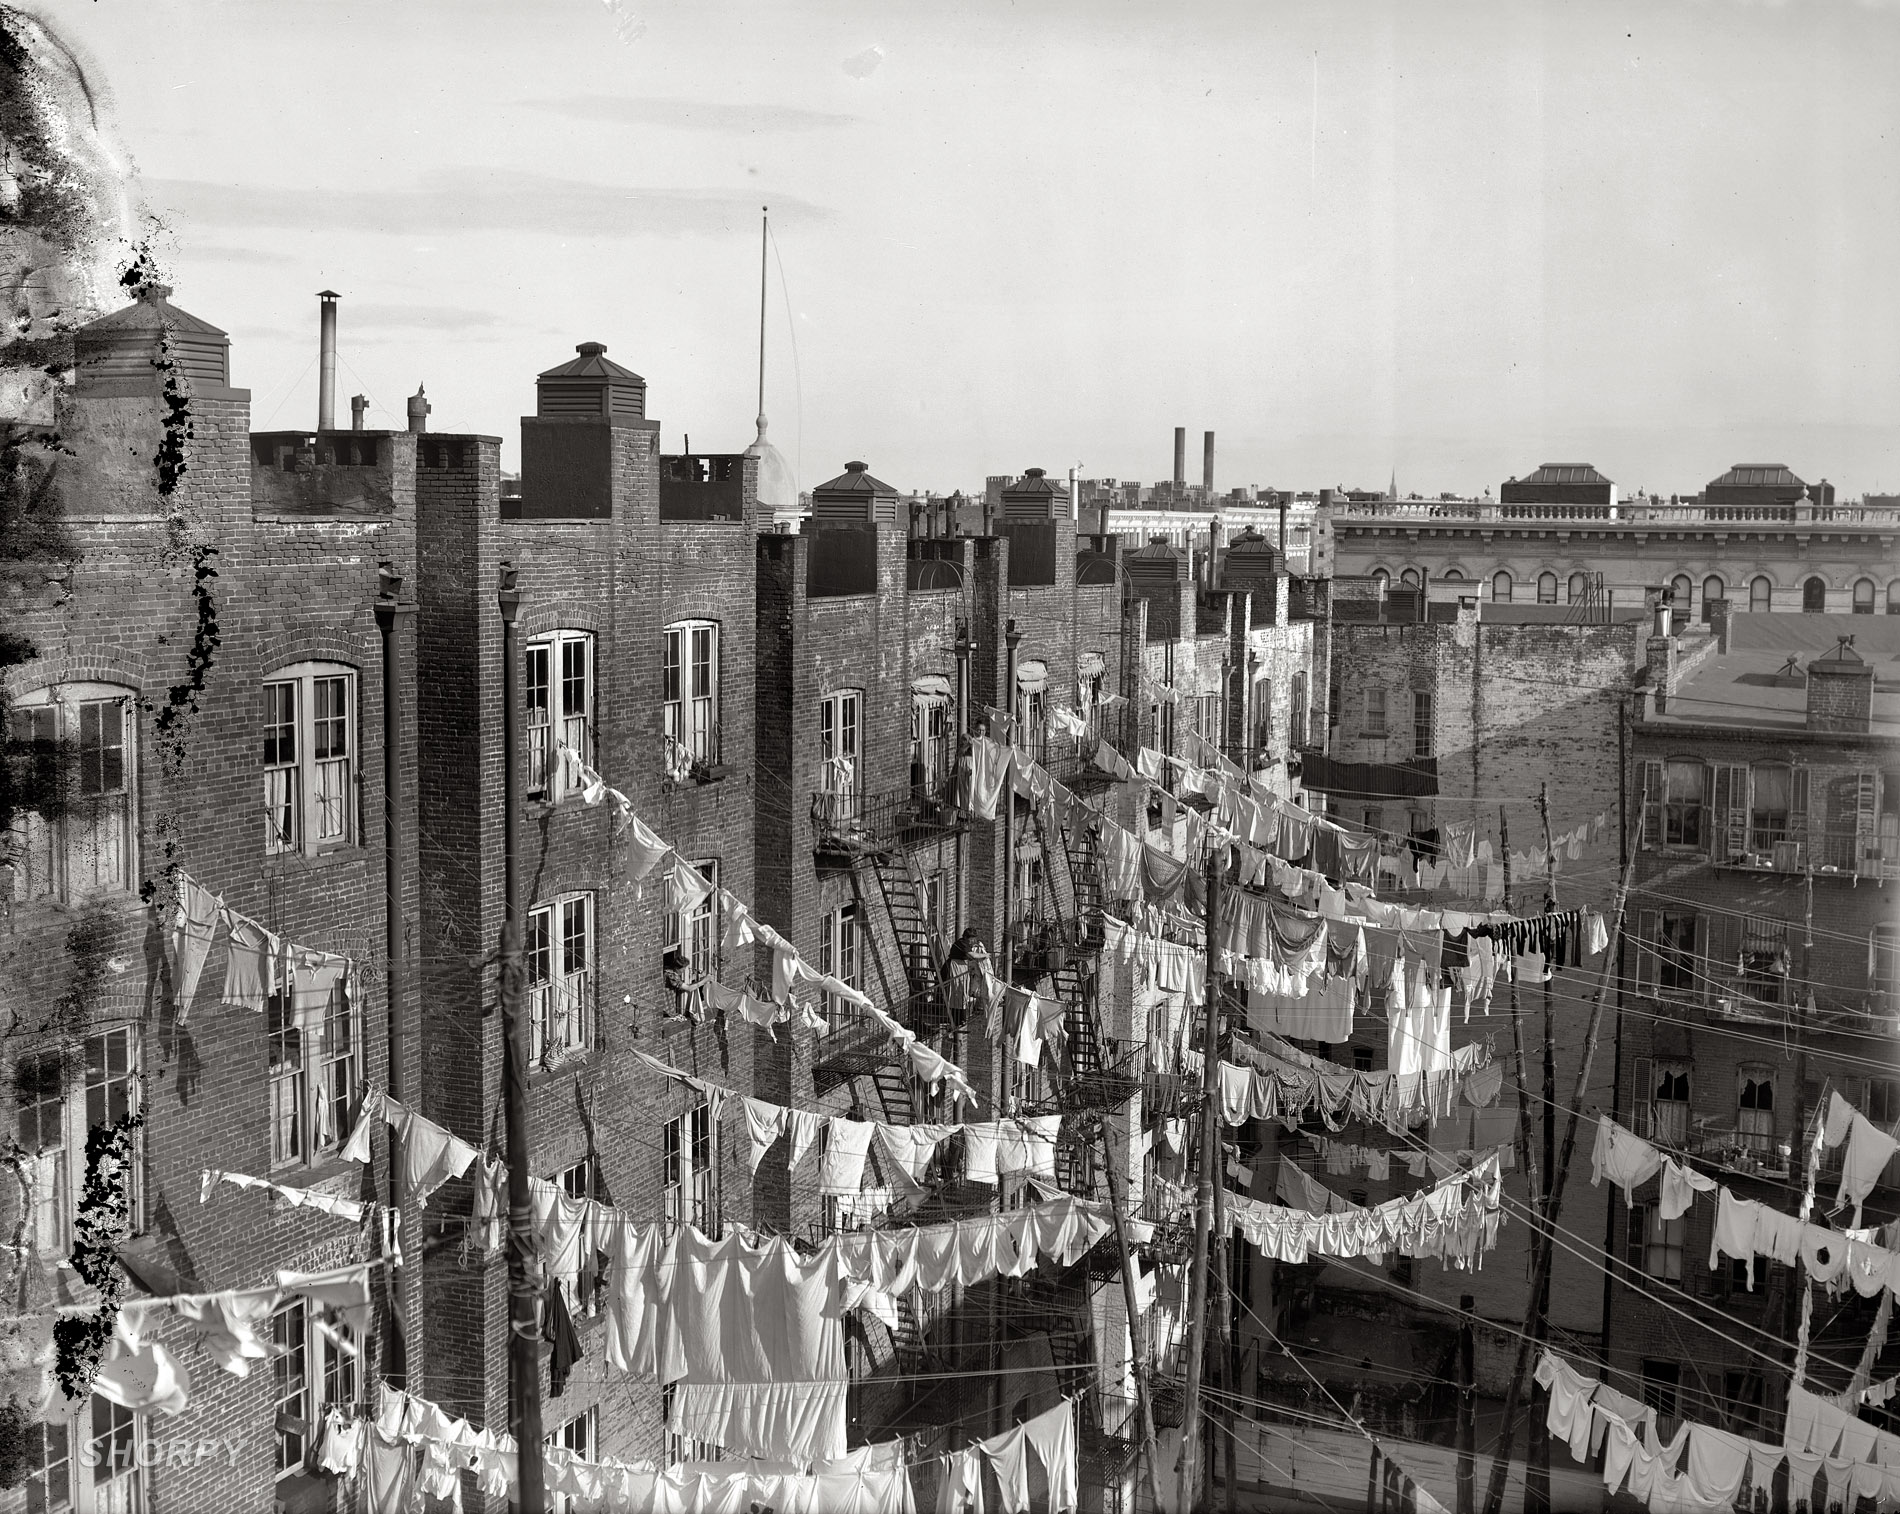 "New York tenement yard c. 1900-10." A washday wonderland in this uncropped version of yesterday's post. Detroit Publishing Co. glass negative. View full size.